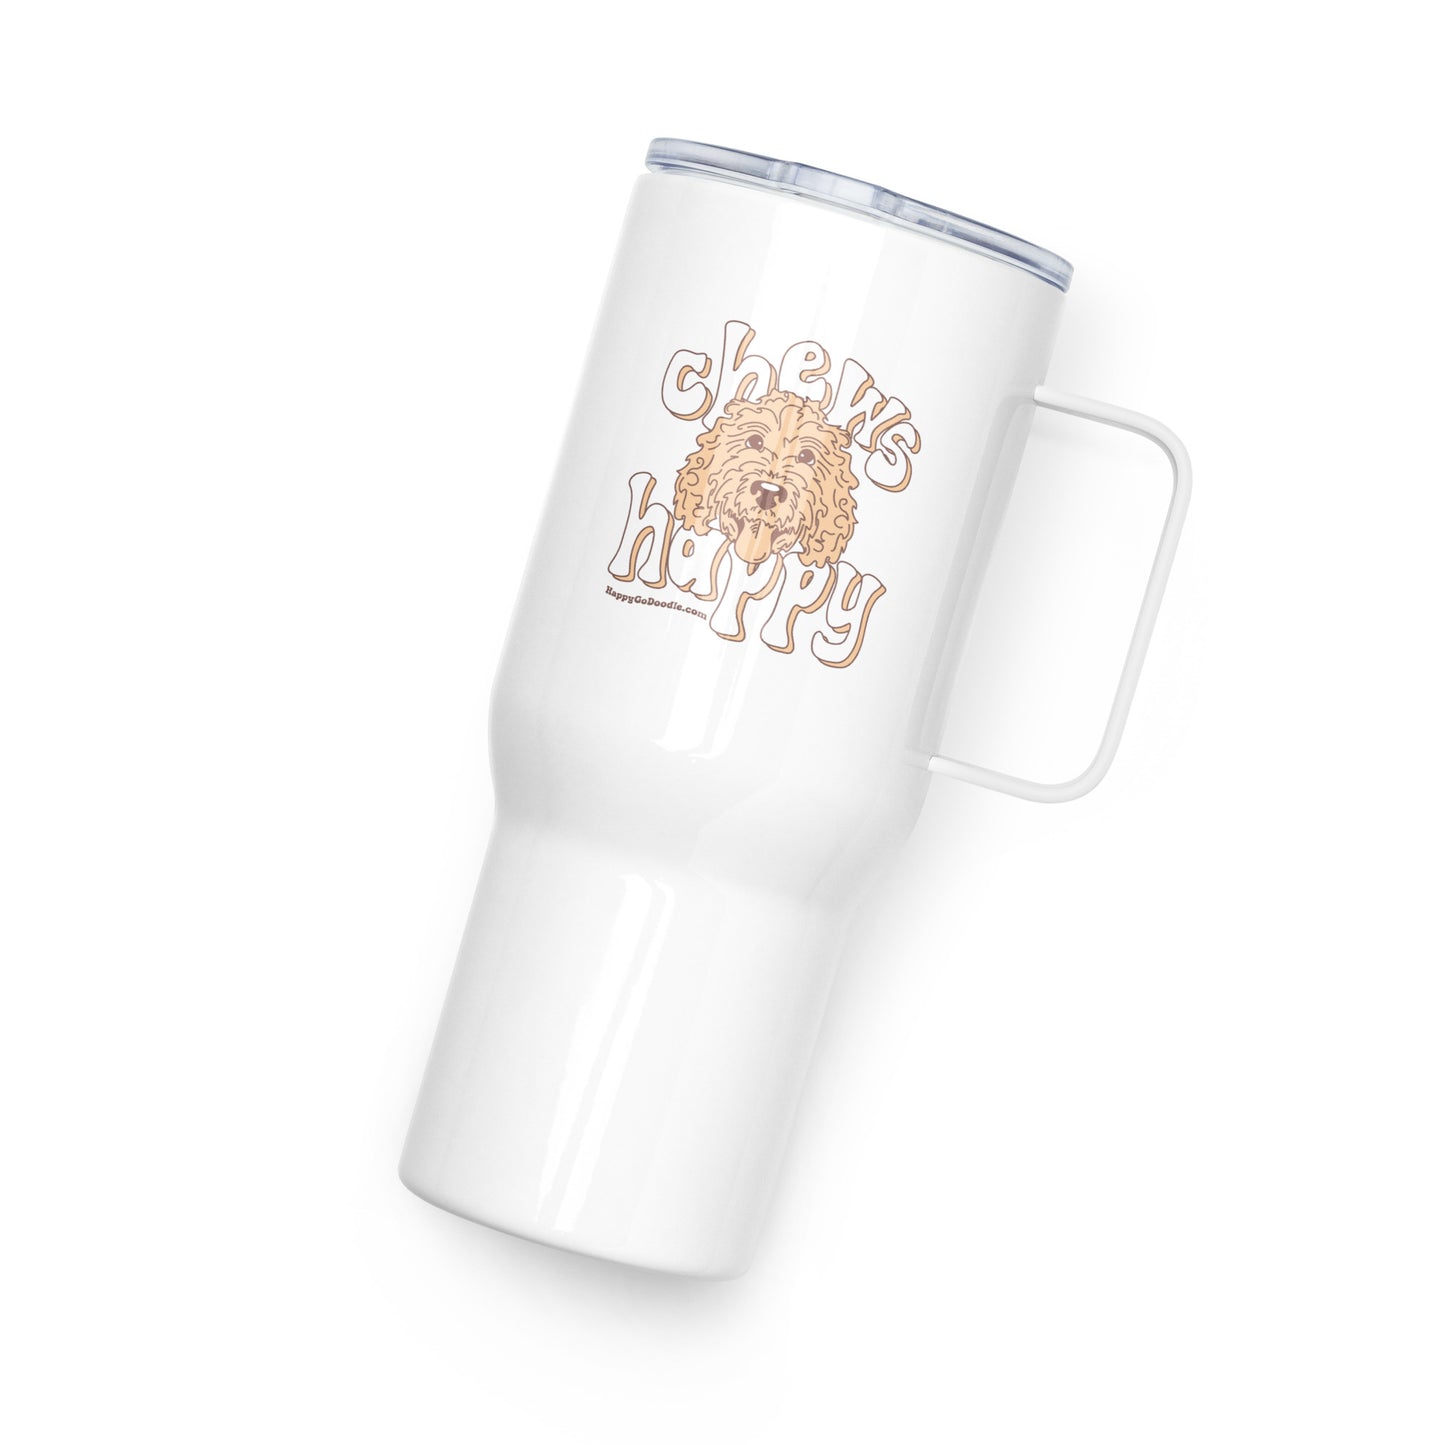 White travel tumbler with goldendoodle dog and saying "Chews Happy"